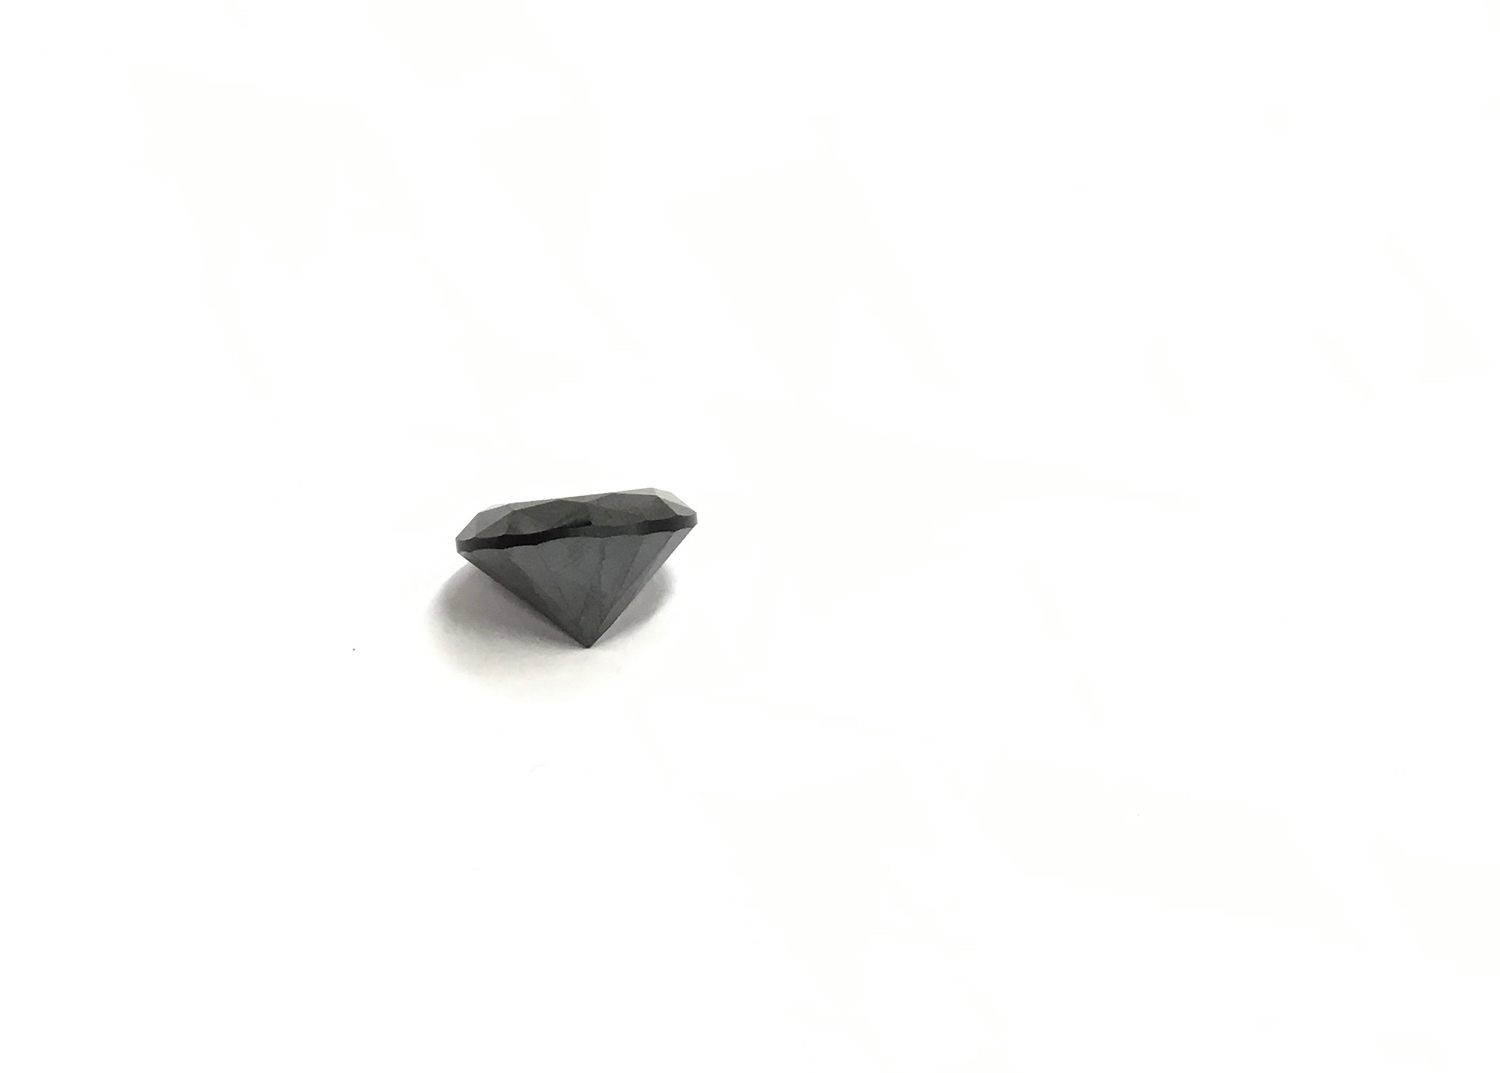 Black moissanite/diamond single stone - approx size 15mm x 10mm = approx 10ct. - Image 3 of 3